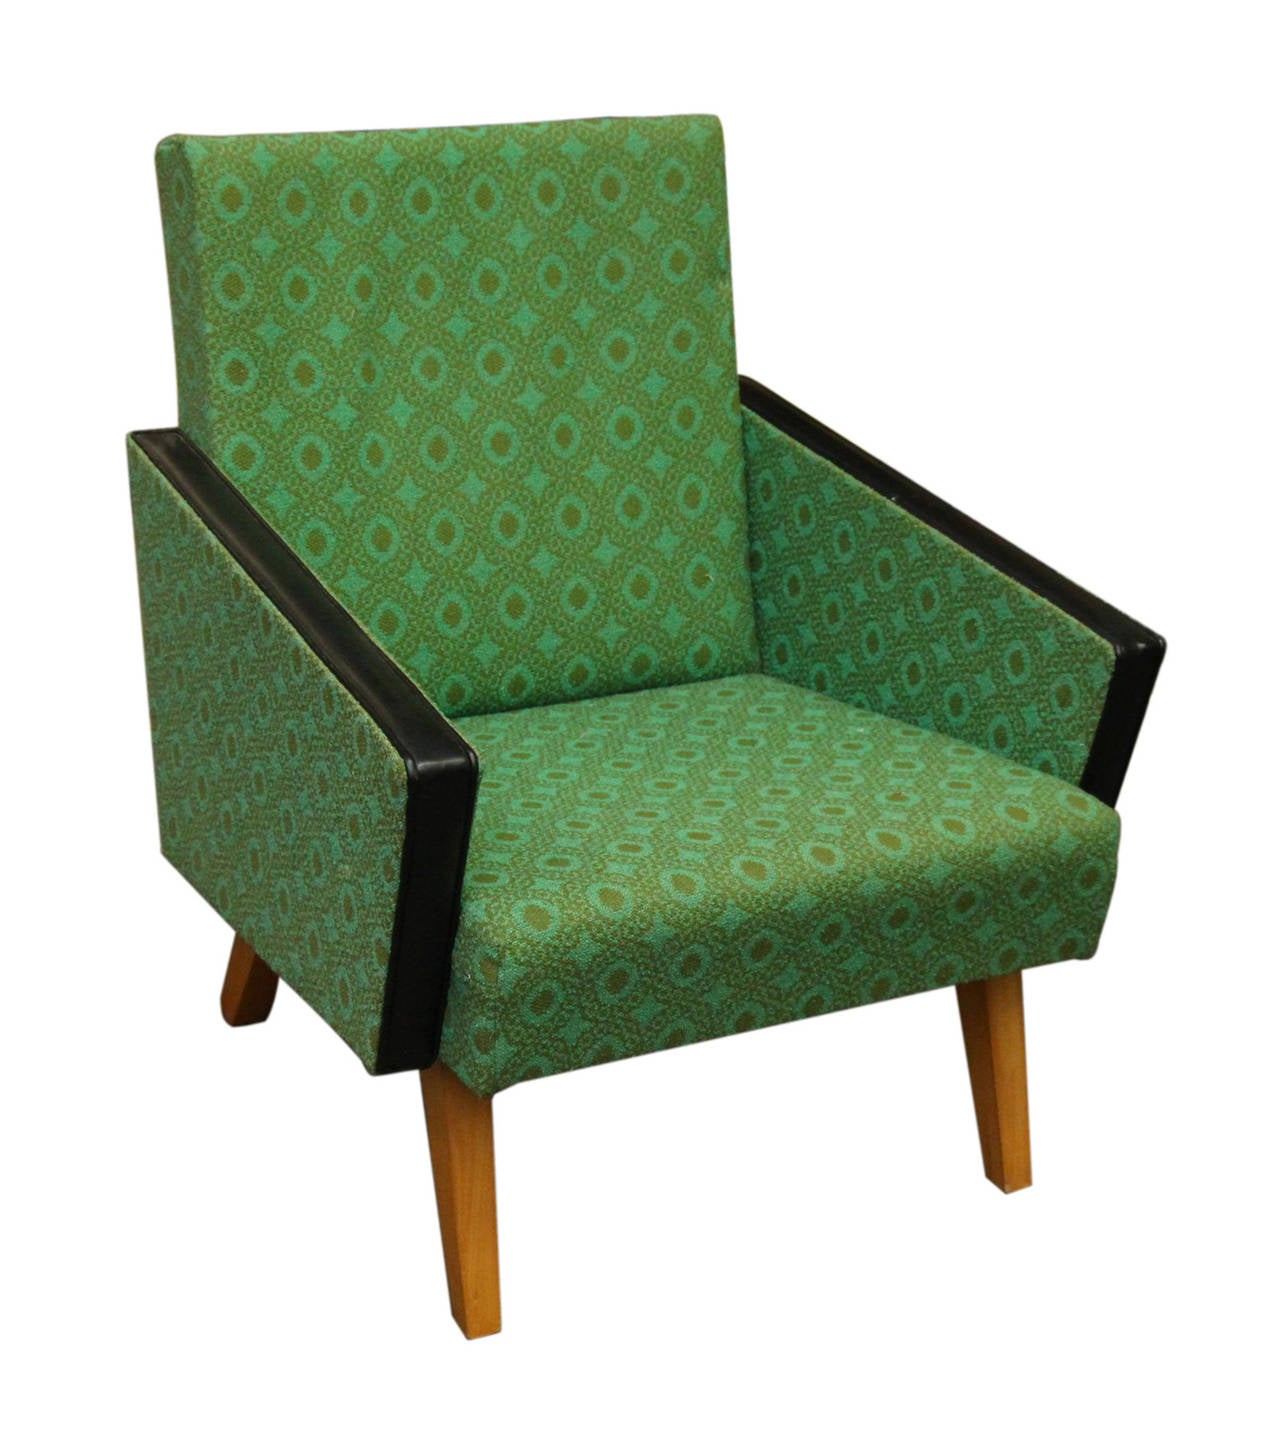 French 1950s Pair of Mid-Century Modern Green and Black Angular Armchairs from France